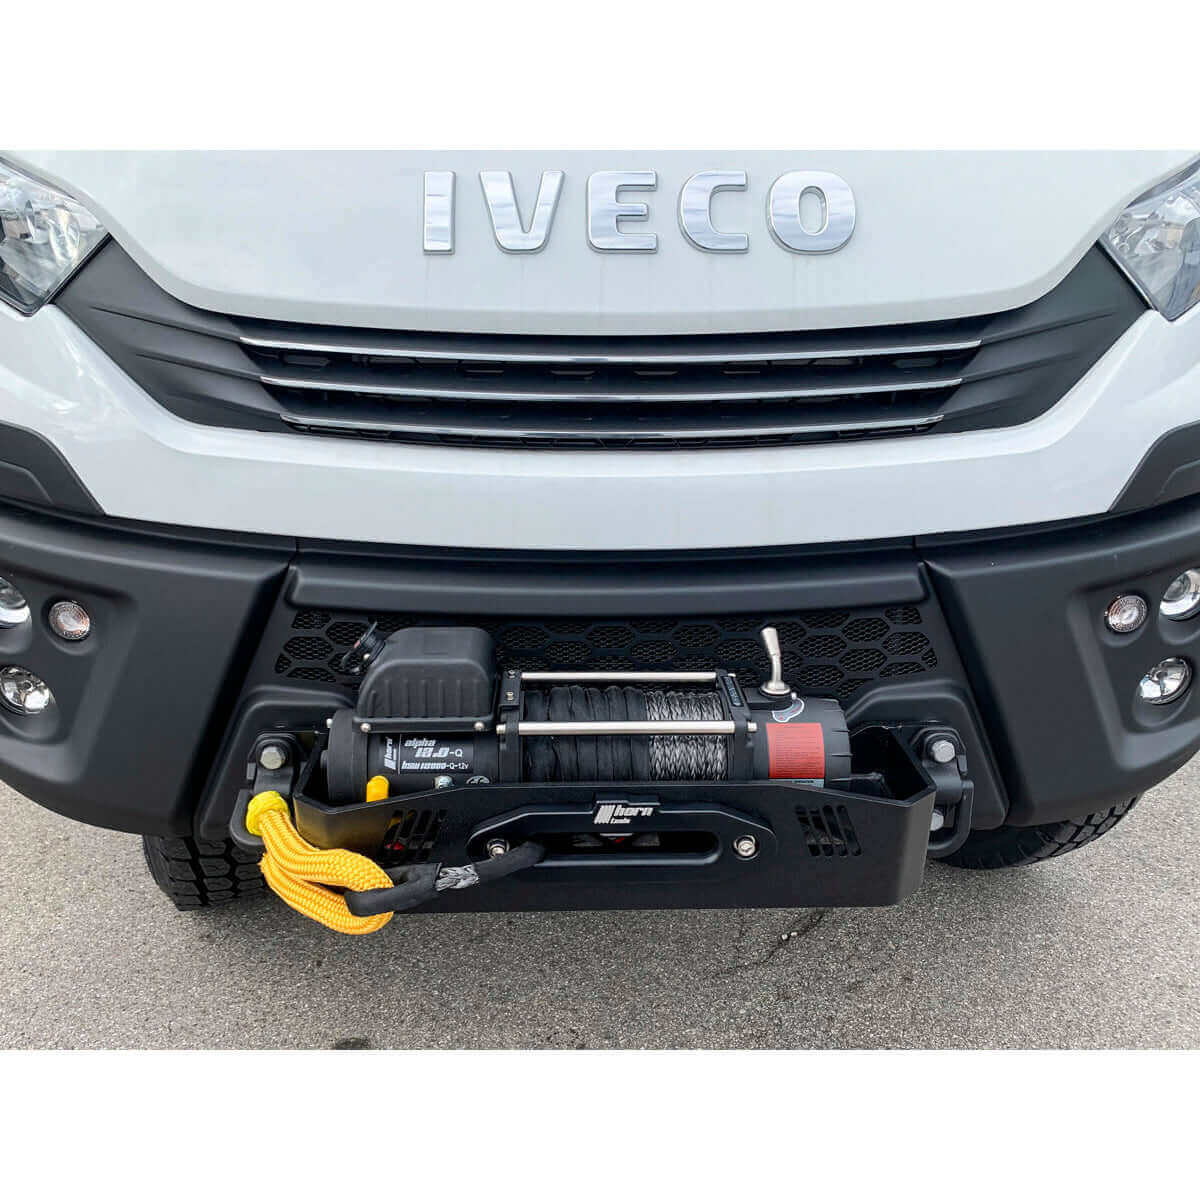 Winch system Alpha for Iveco Daily 4x4 - 5.4 tons